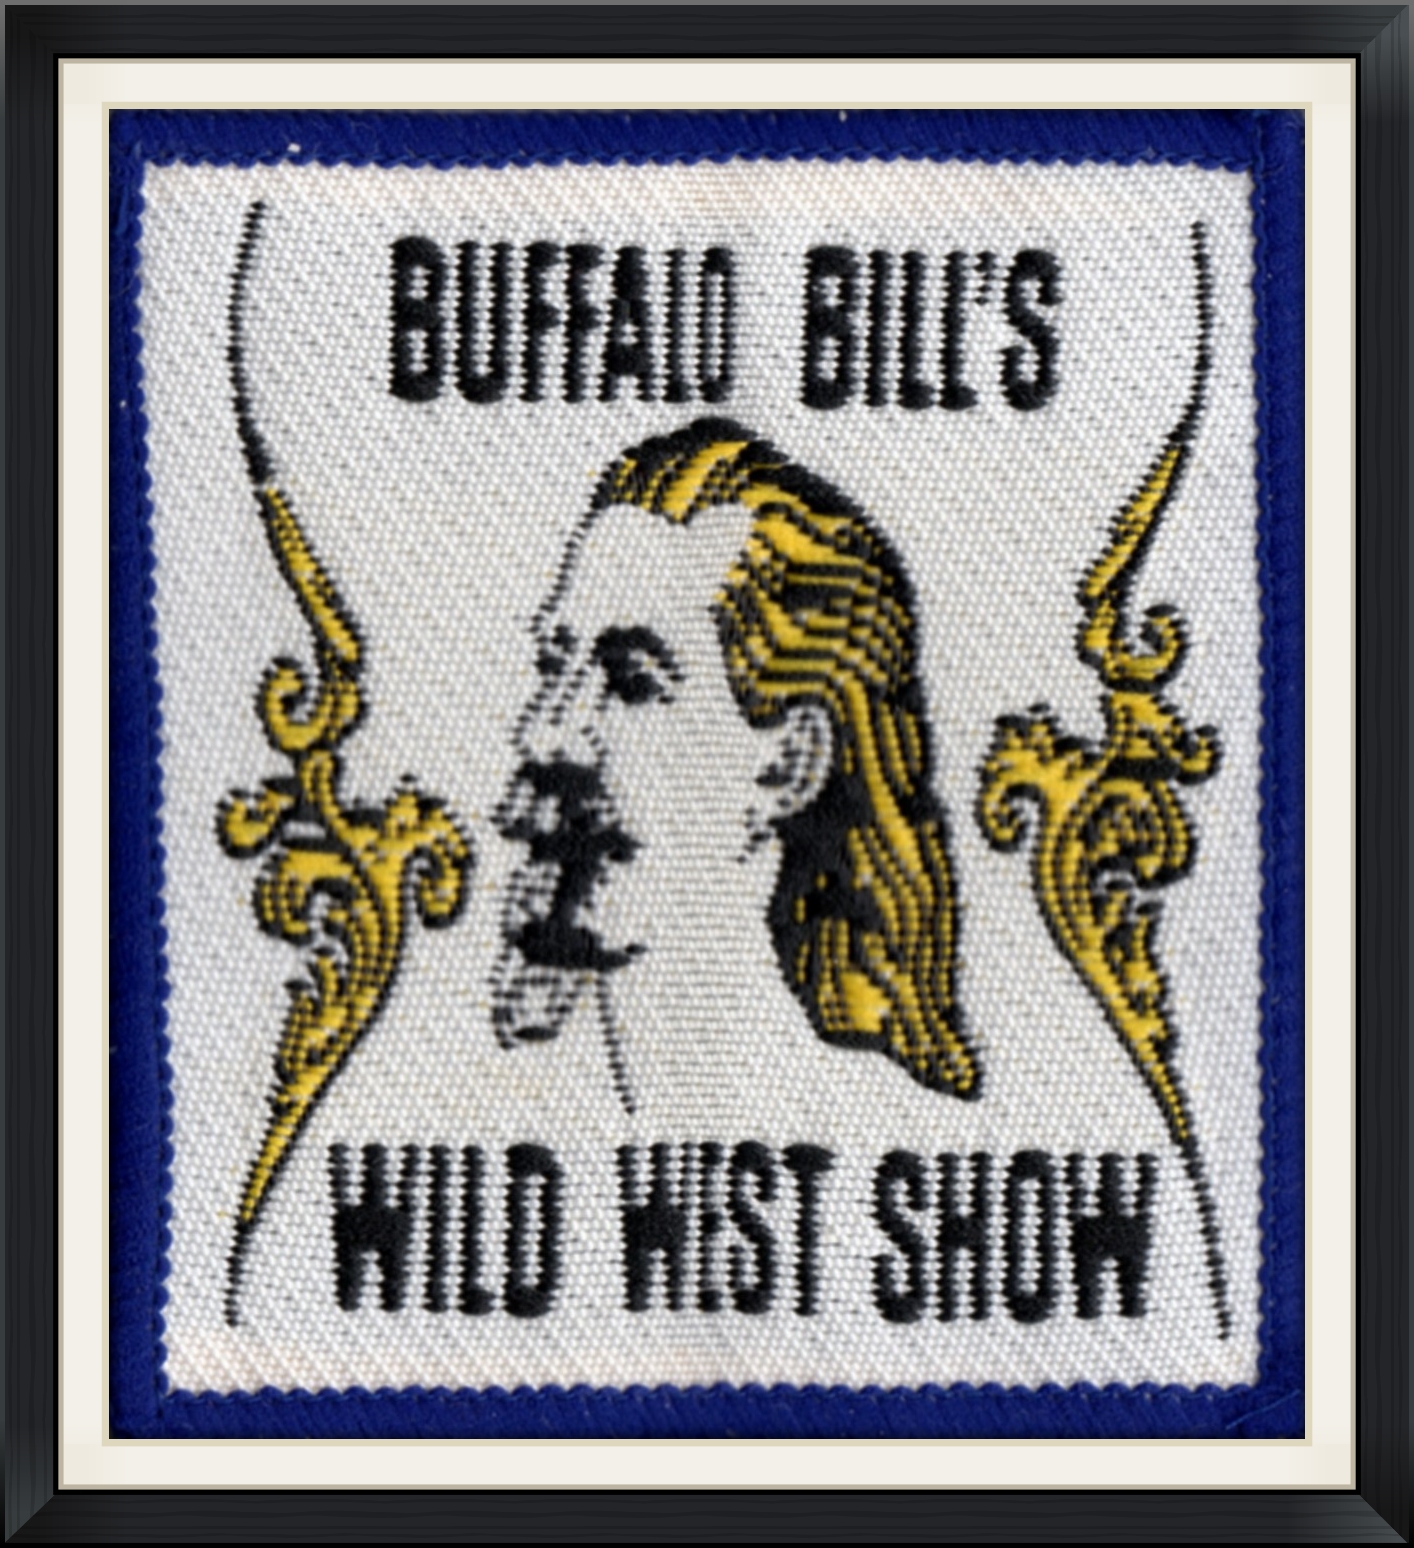 Sew/Iron on Embroidered/Stitched & Printed, Uniform/Vest/Jacket Patches/Badges  — Buffalo Bill Legacy Gallery